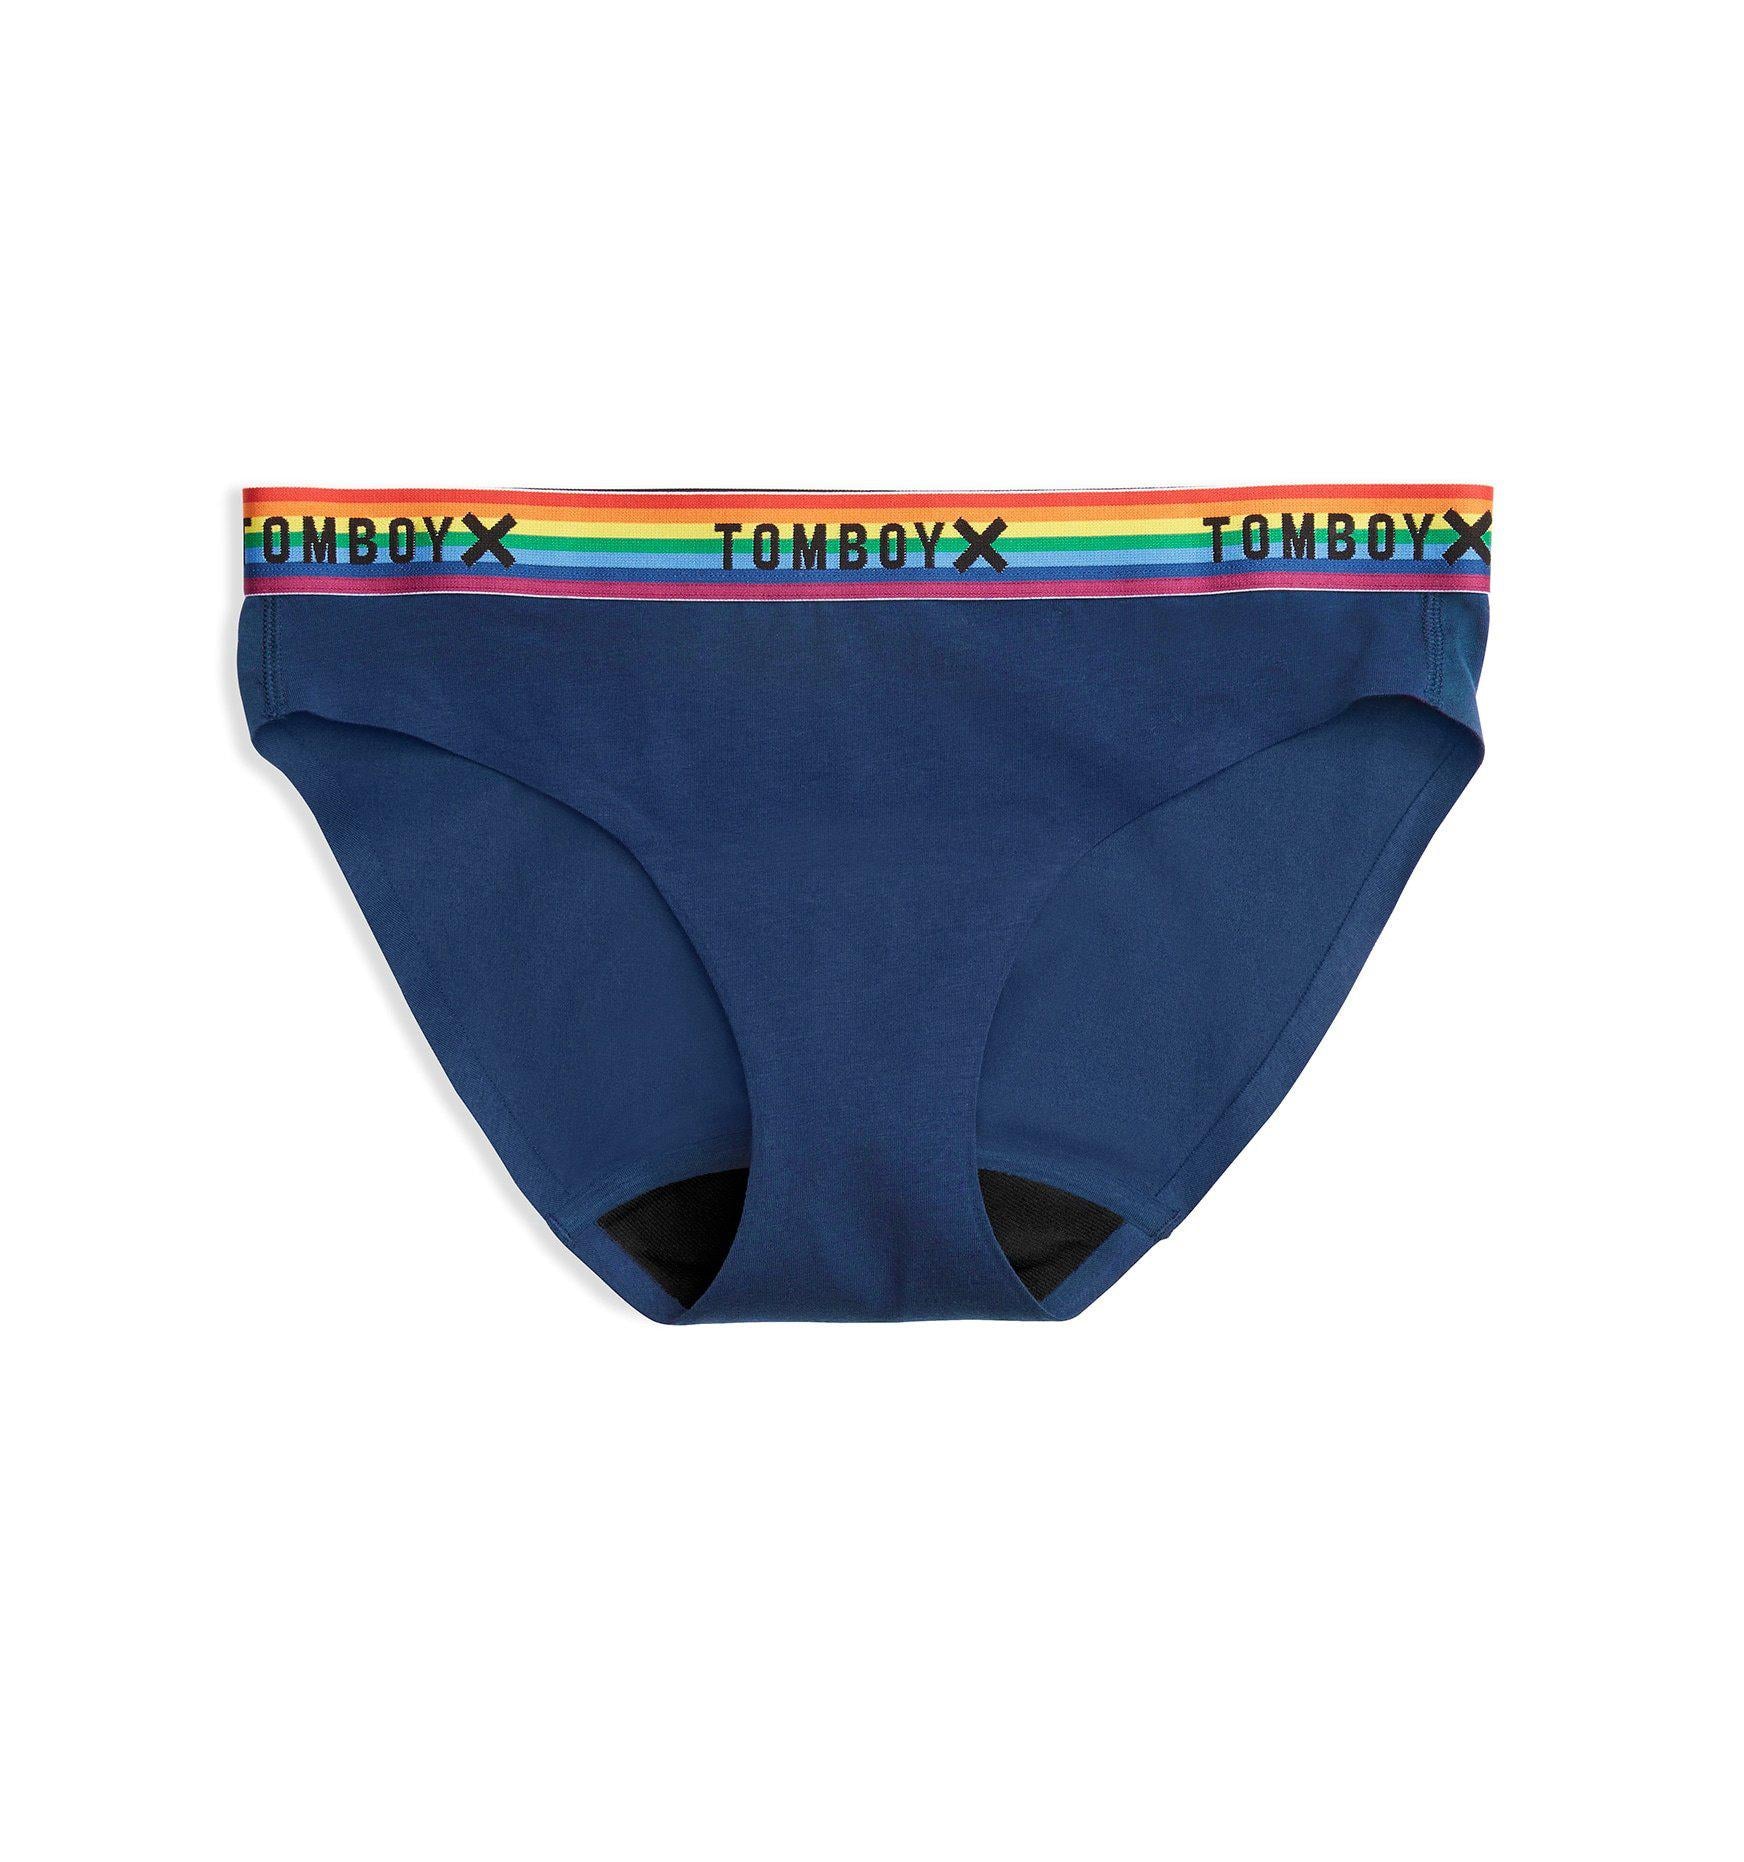 Save Your Coin: TomboyX Accepts HSA and FSA Dollars for Period Underwear